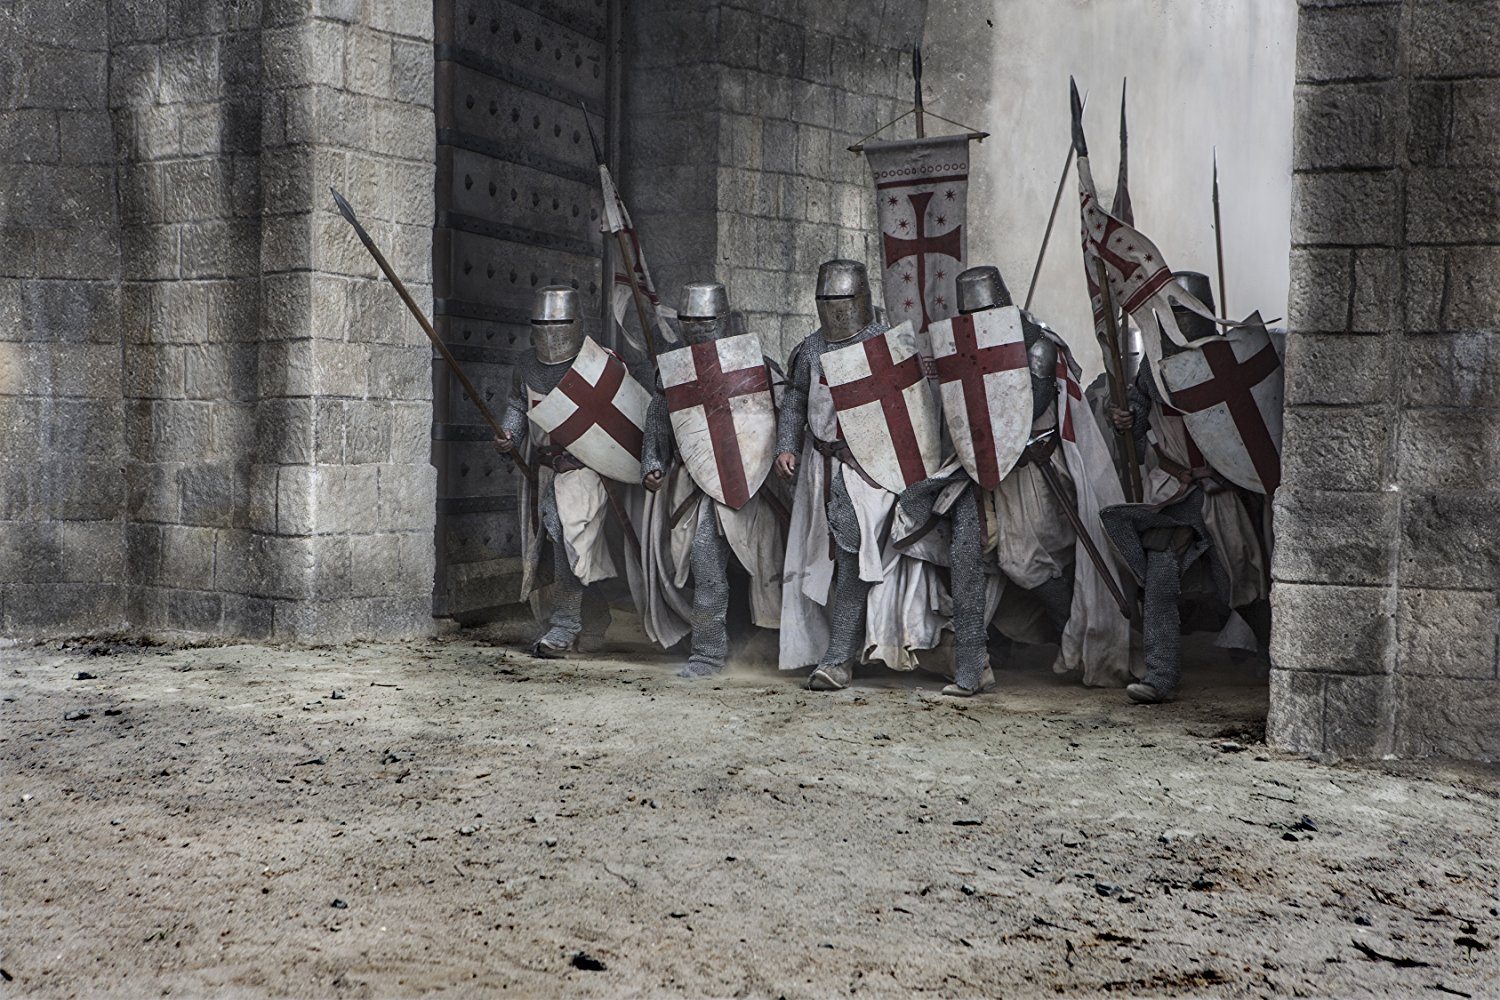 Knights armed with shields in Knightfall